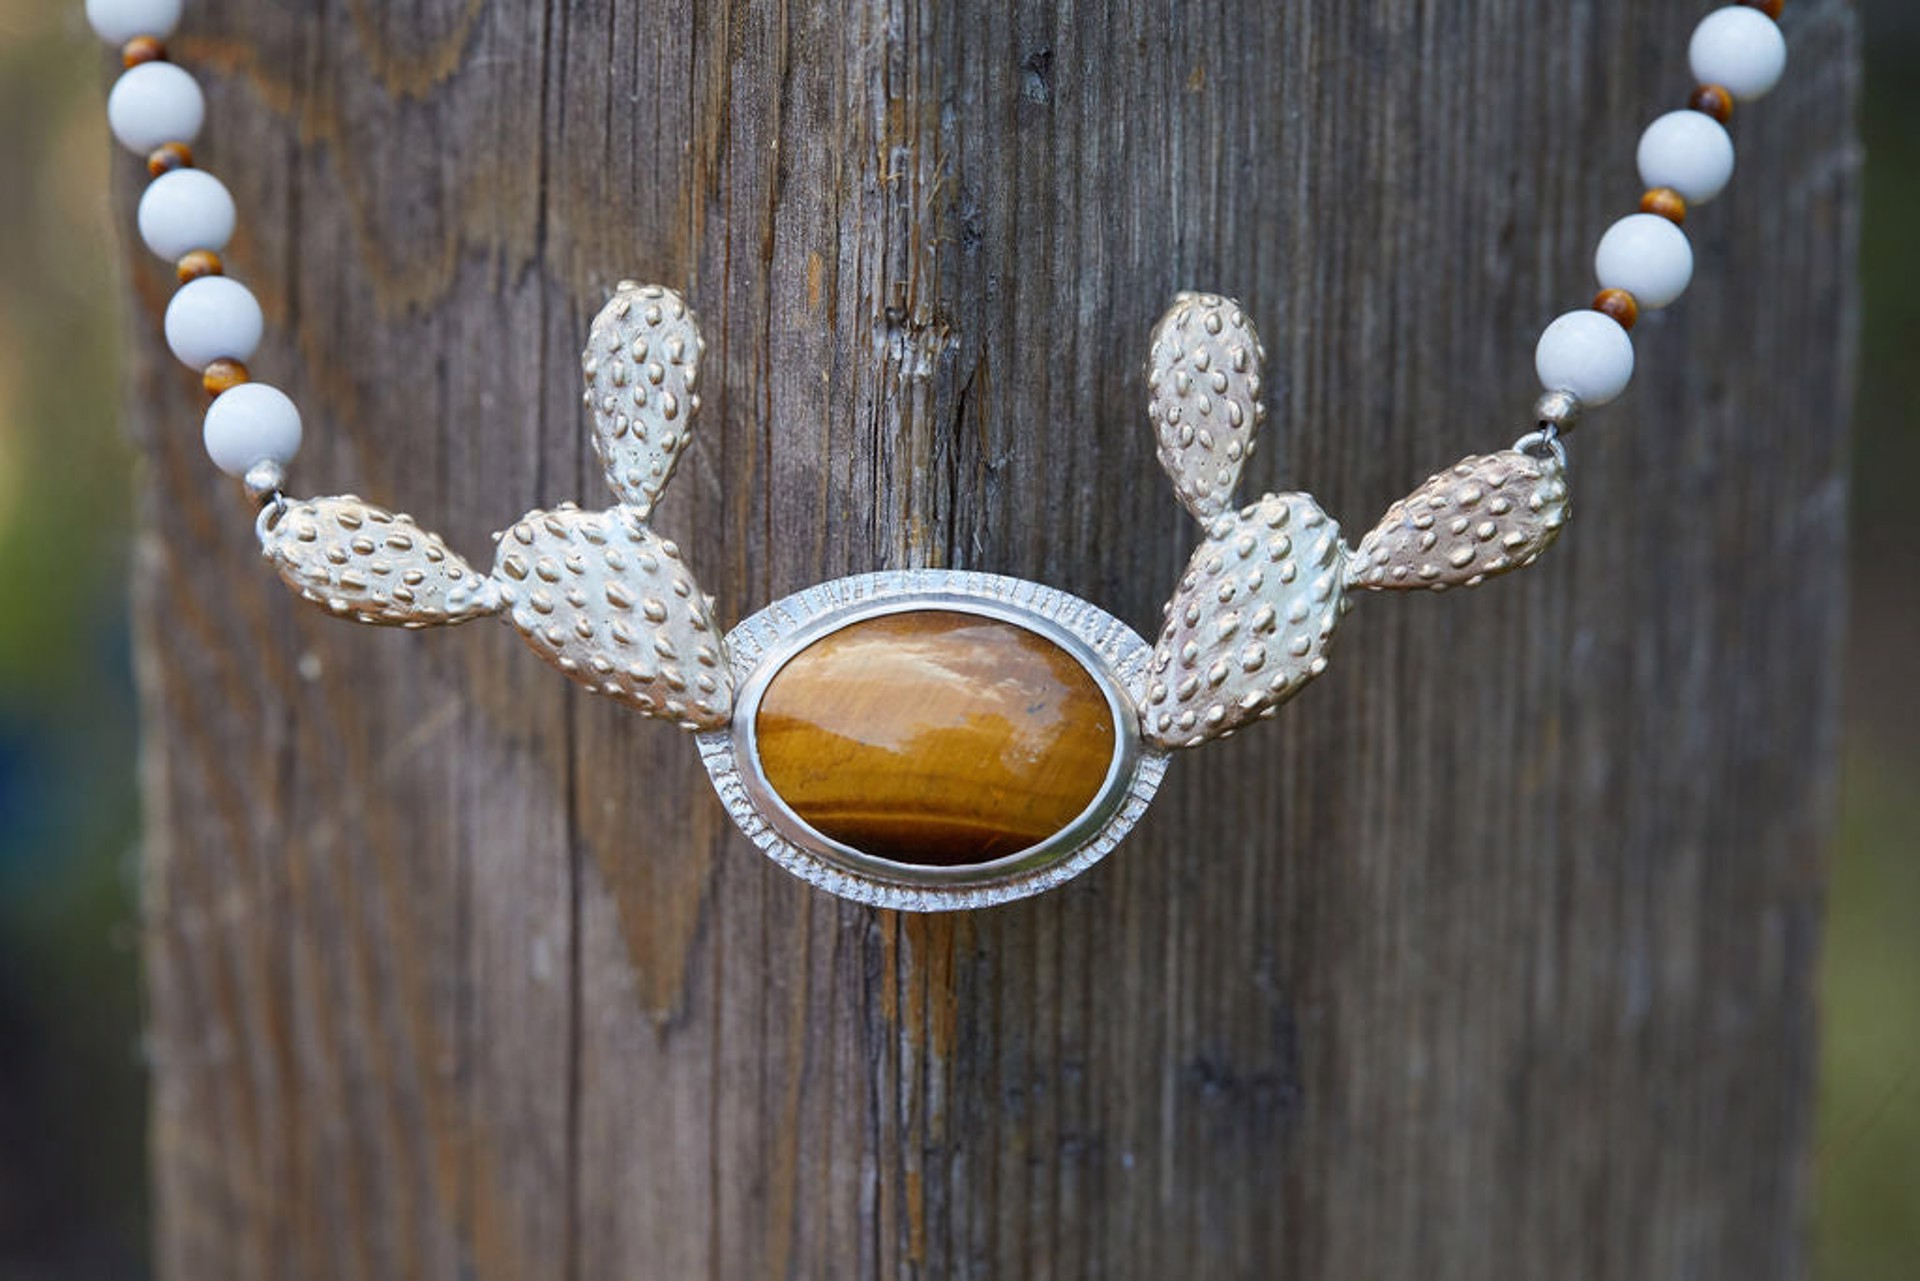 Snowy Nopal Necklace by Clementine & Co. Jewelry